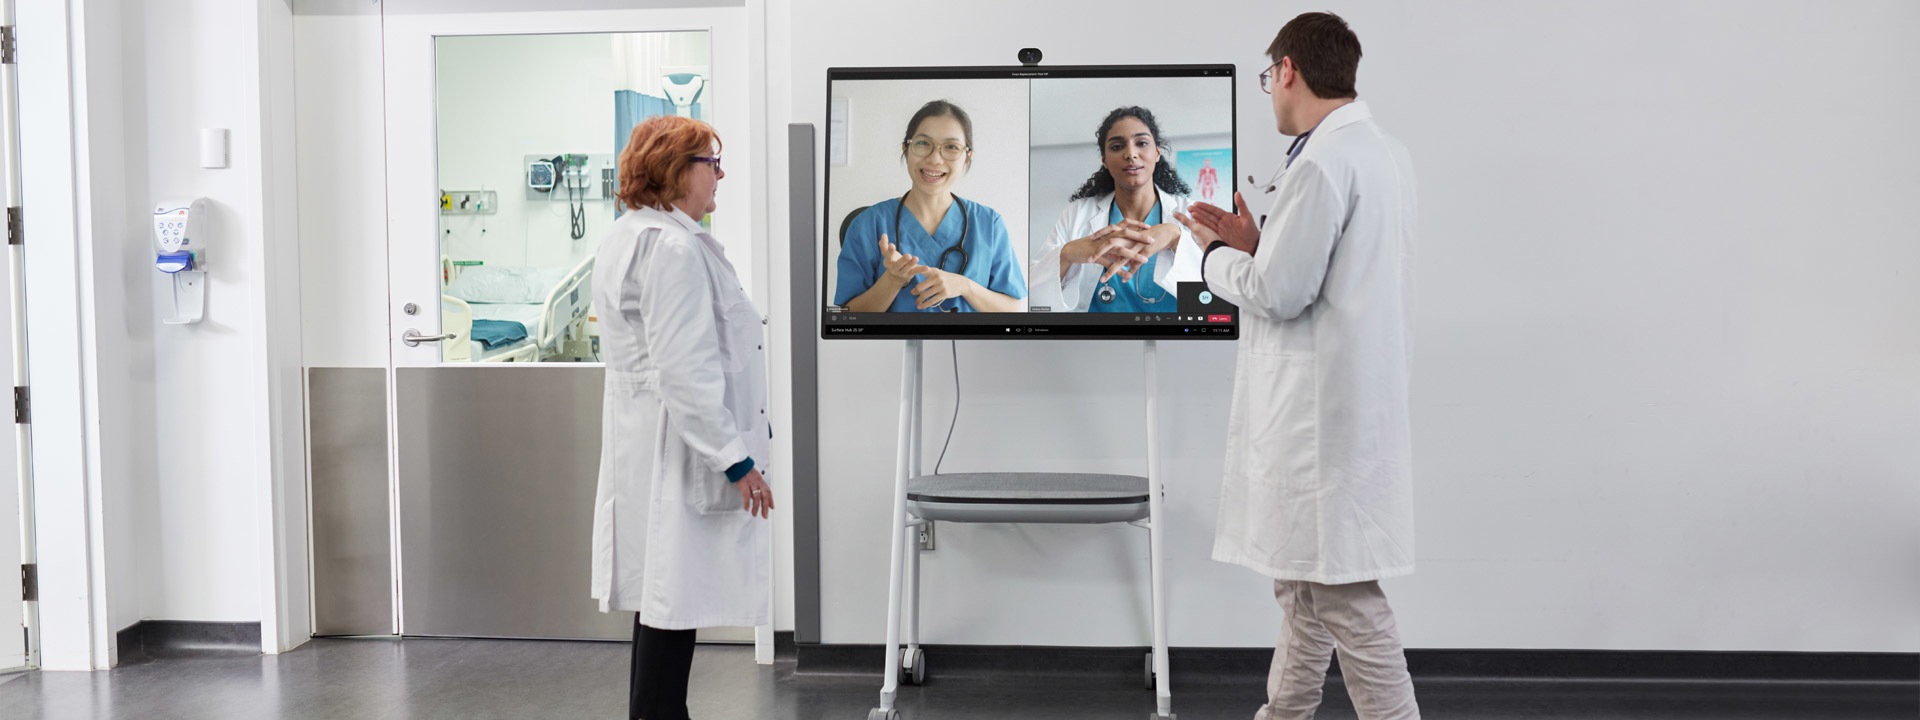 Two medical professionals partake in a Teams video call in a hospital setting